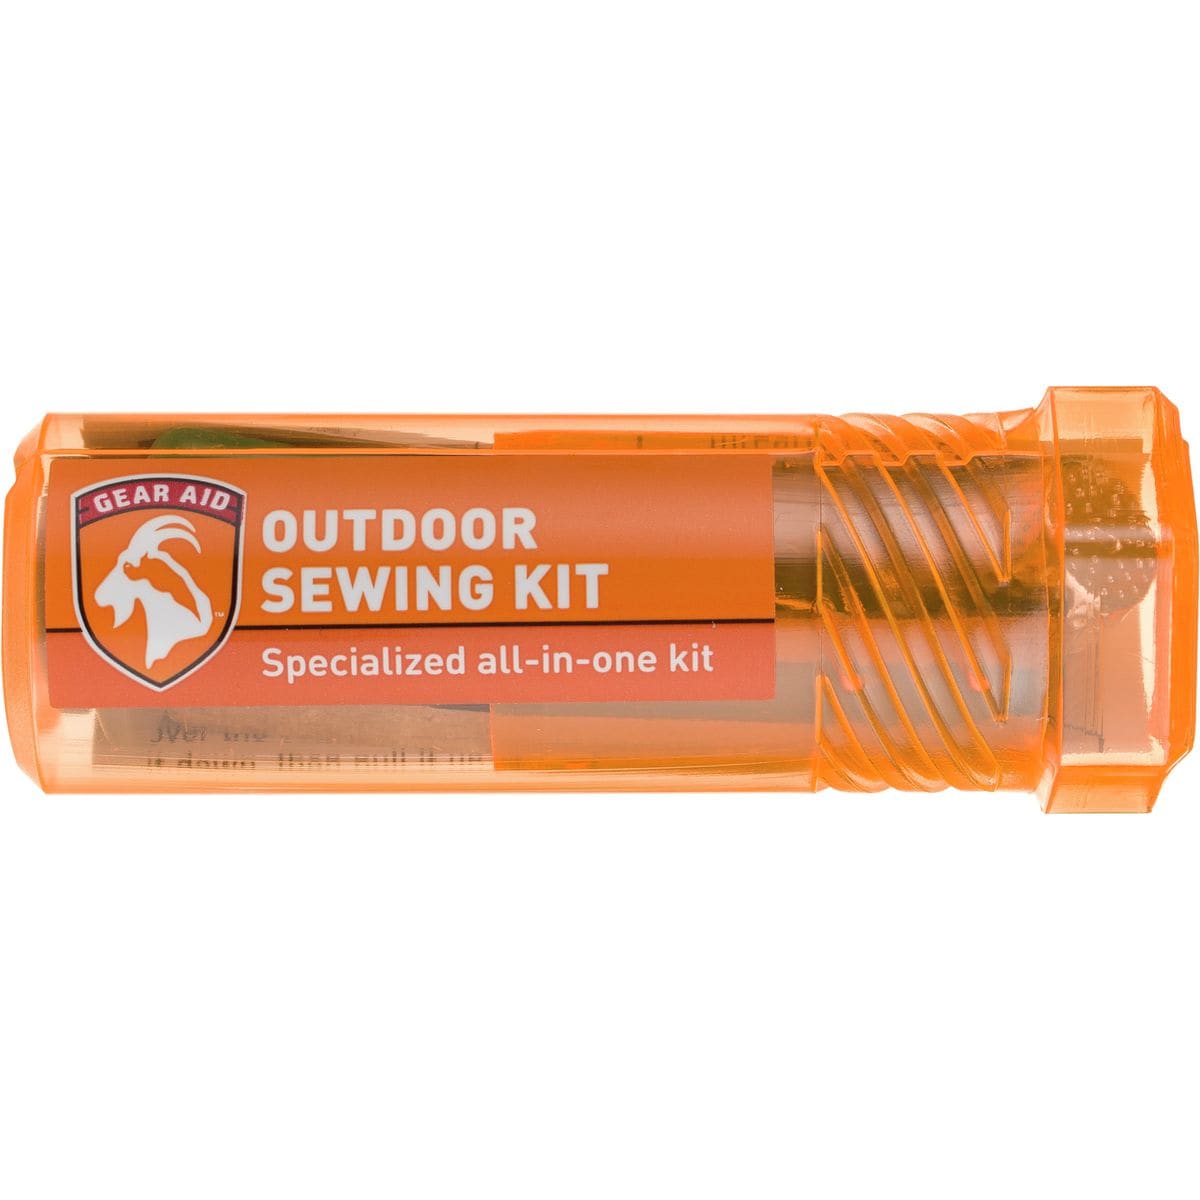 Gear Aid Outdoor Sewing Kit One Color, One Size